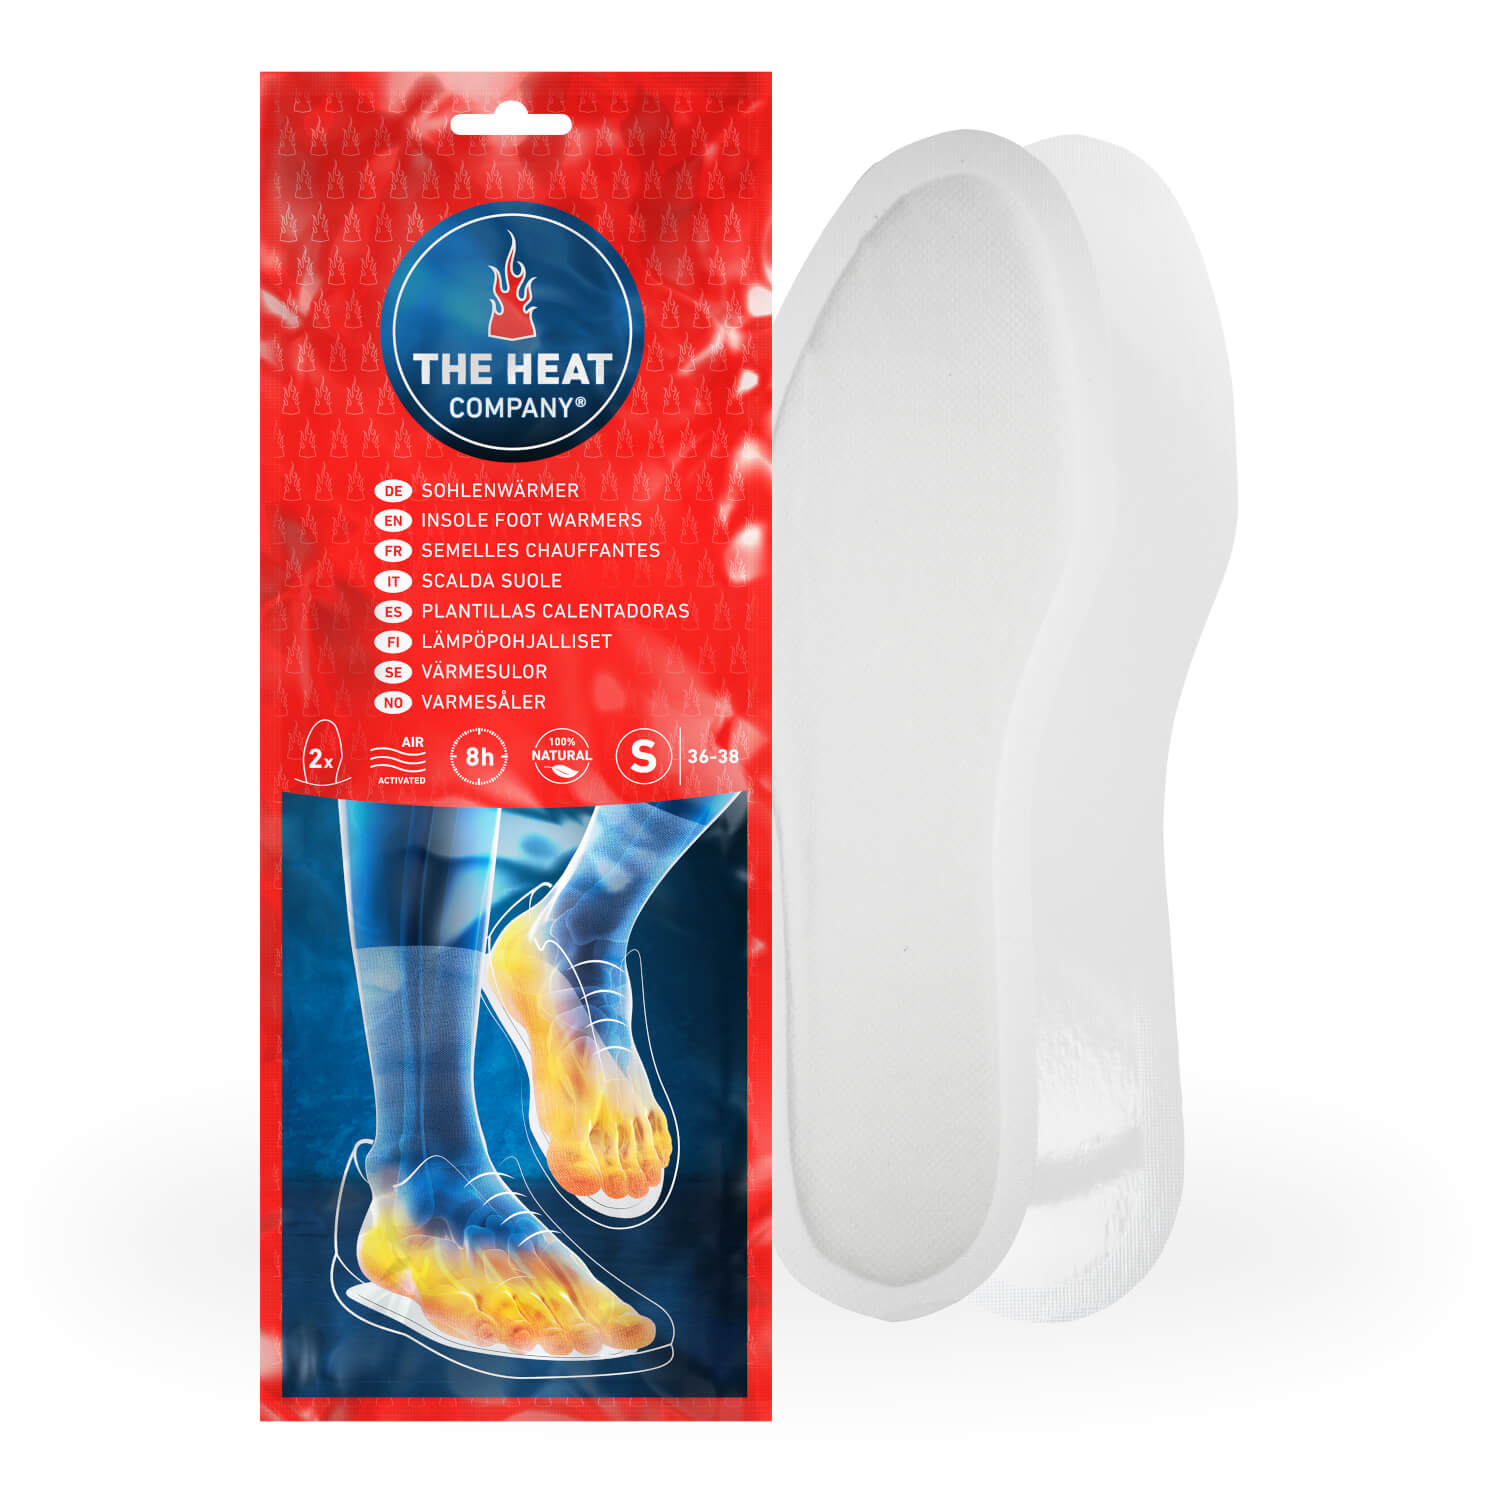 NEW HotHands Insole Foot Warmers w Adhesive 9 Hours of Heat 4 Pairs /4 Pack 